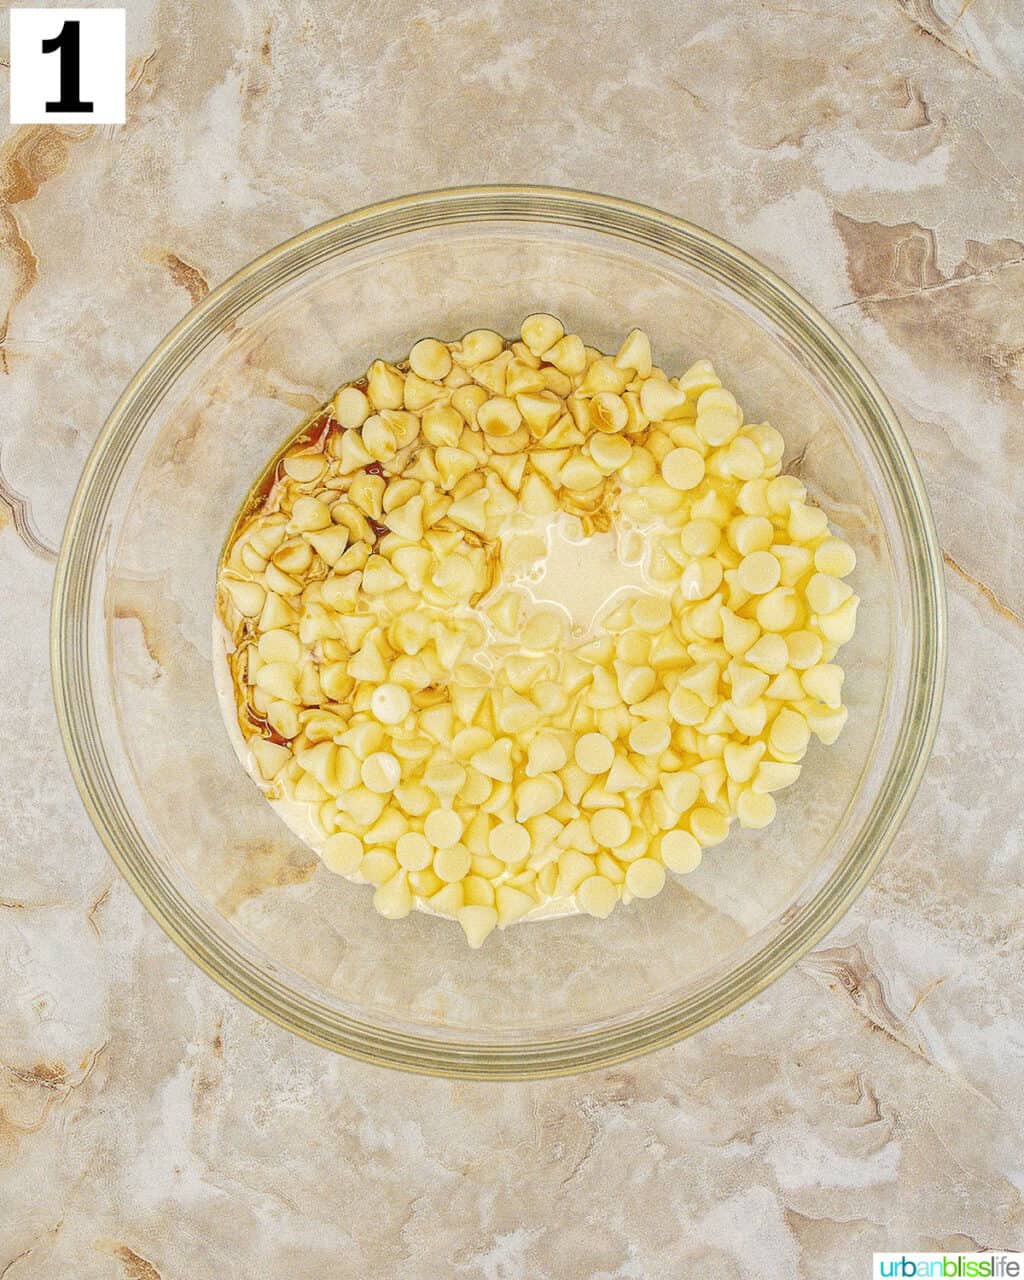 white chocolate chips in a glass bowl.